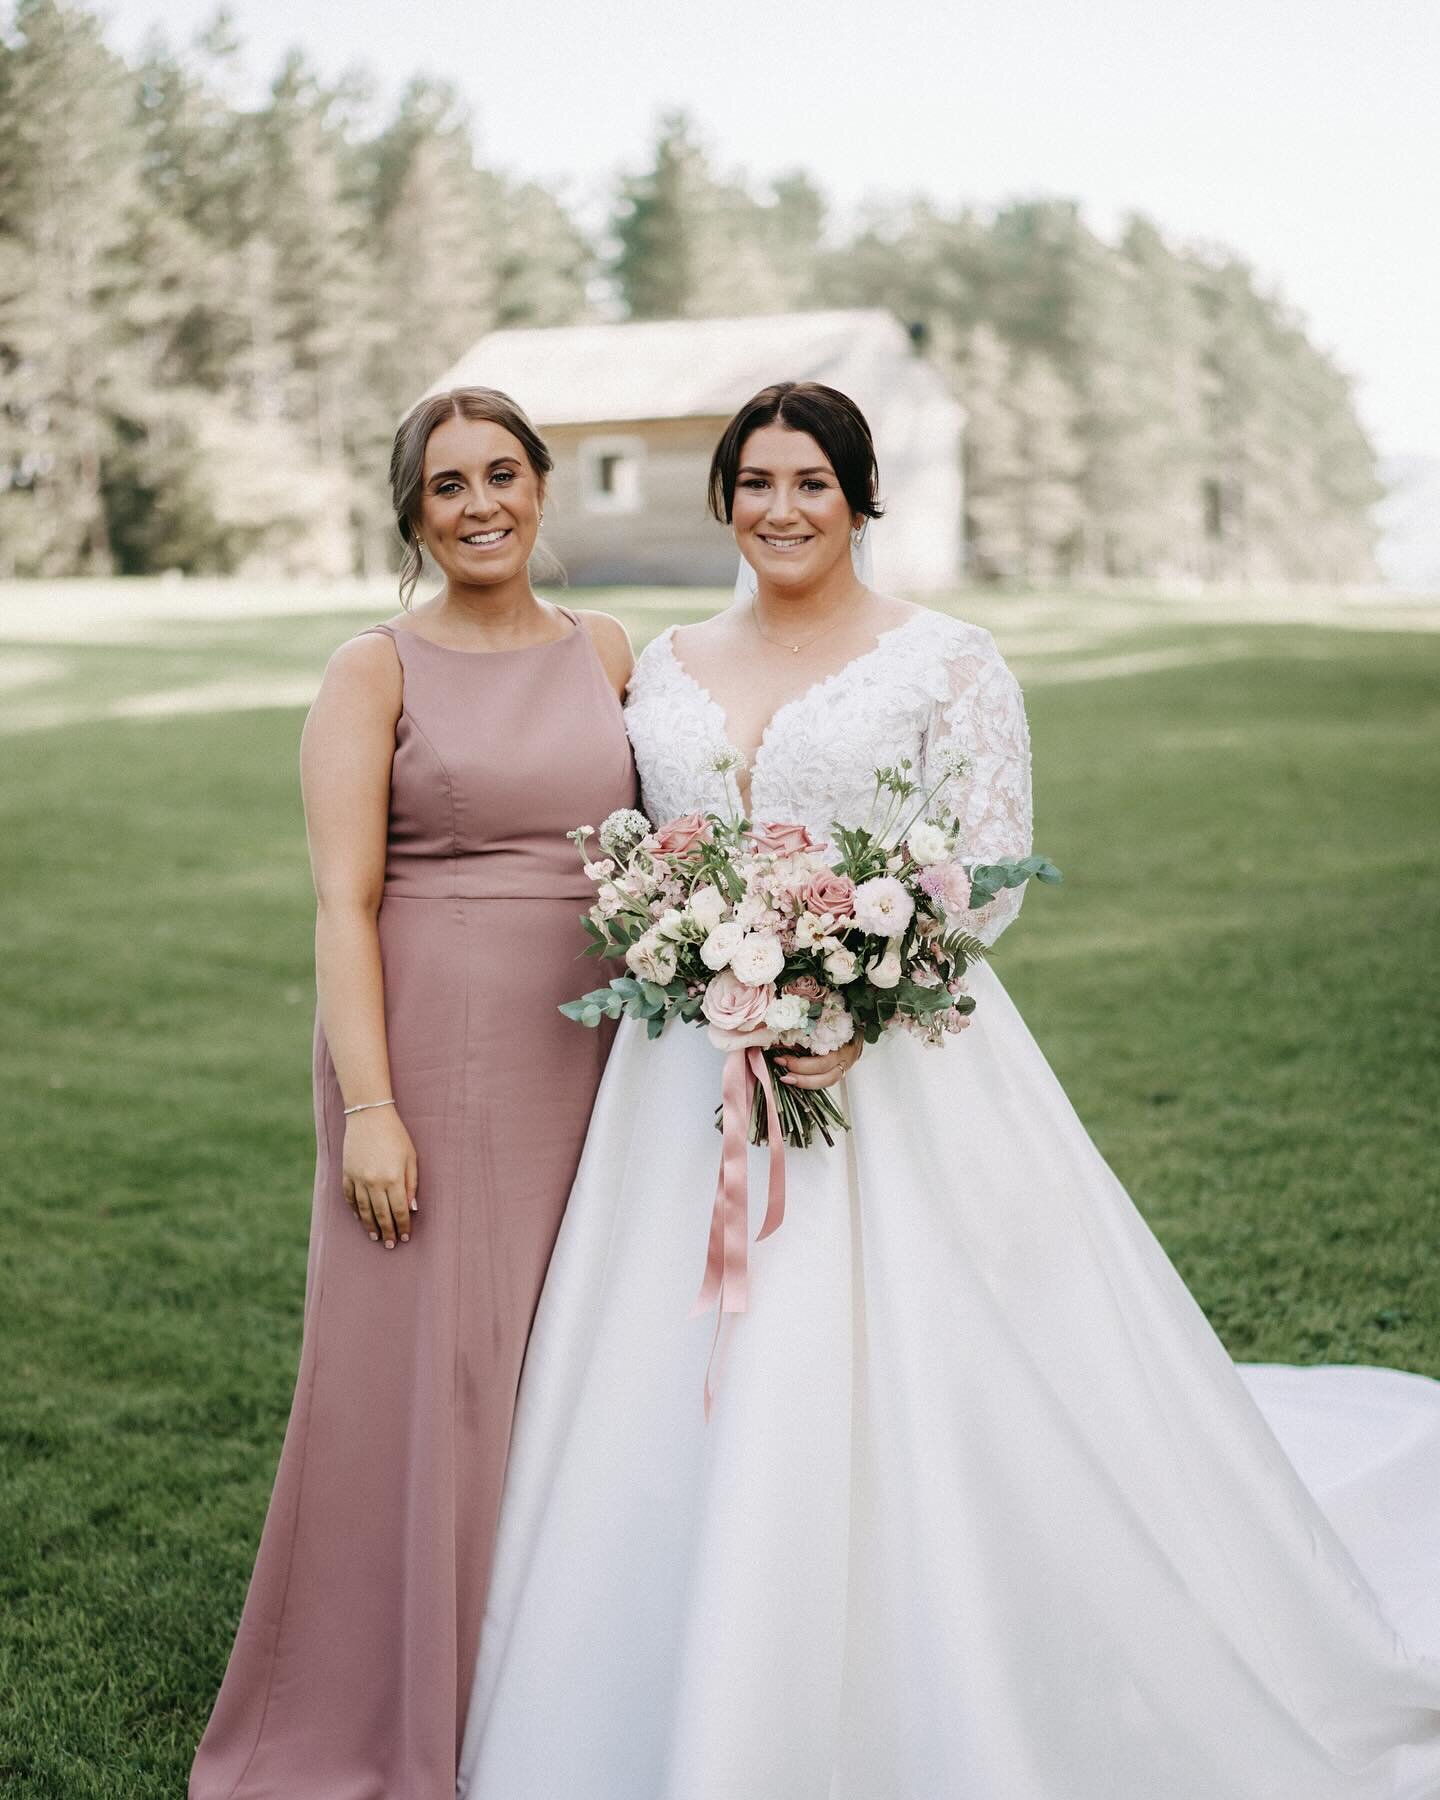 Beautiful Beth 💖

Bridesmaid wearing: @dessygroup 

Style: 6758
Colour: Sienna
Fabric: Crepe

Swipe to see how Beth used leftover bridesmaid material to create something beautiful for her cake 😍

#bridesmaiddresses #bridesmaidglam #bridesmaidinspo 